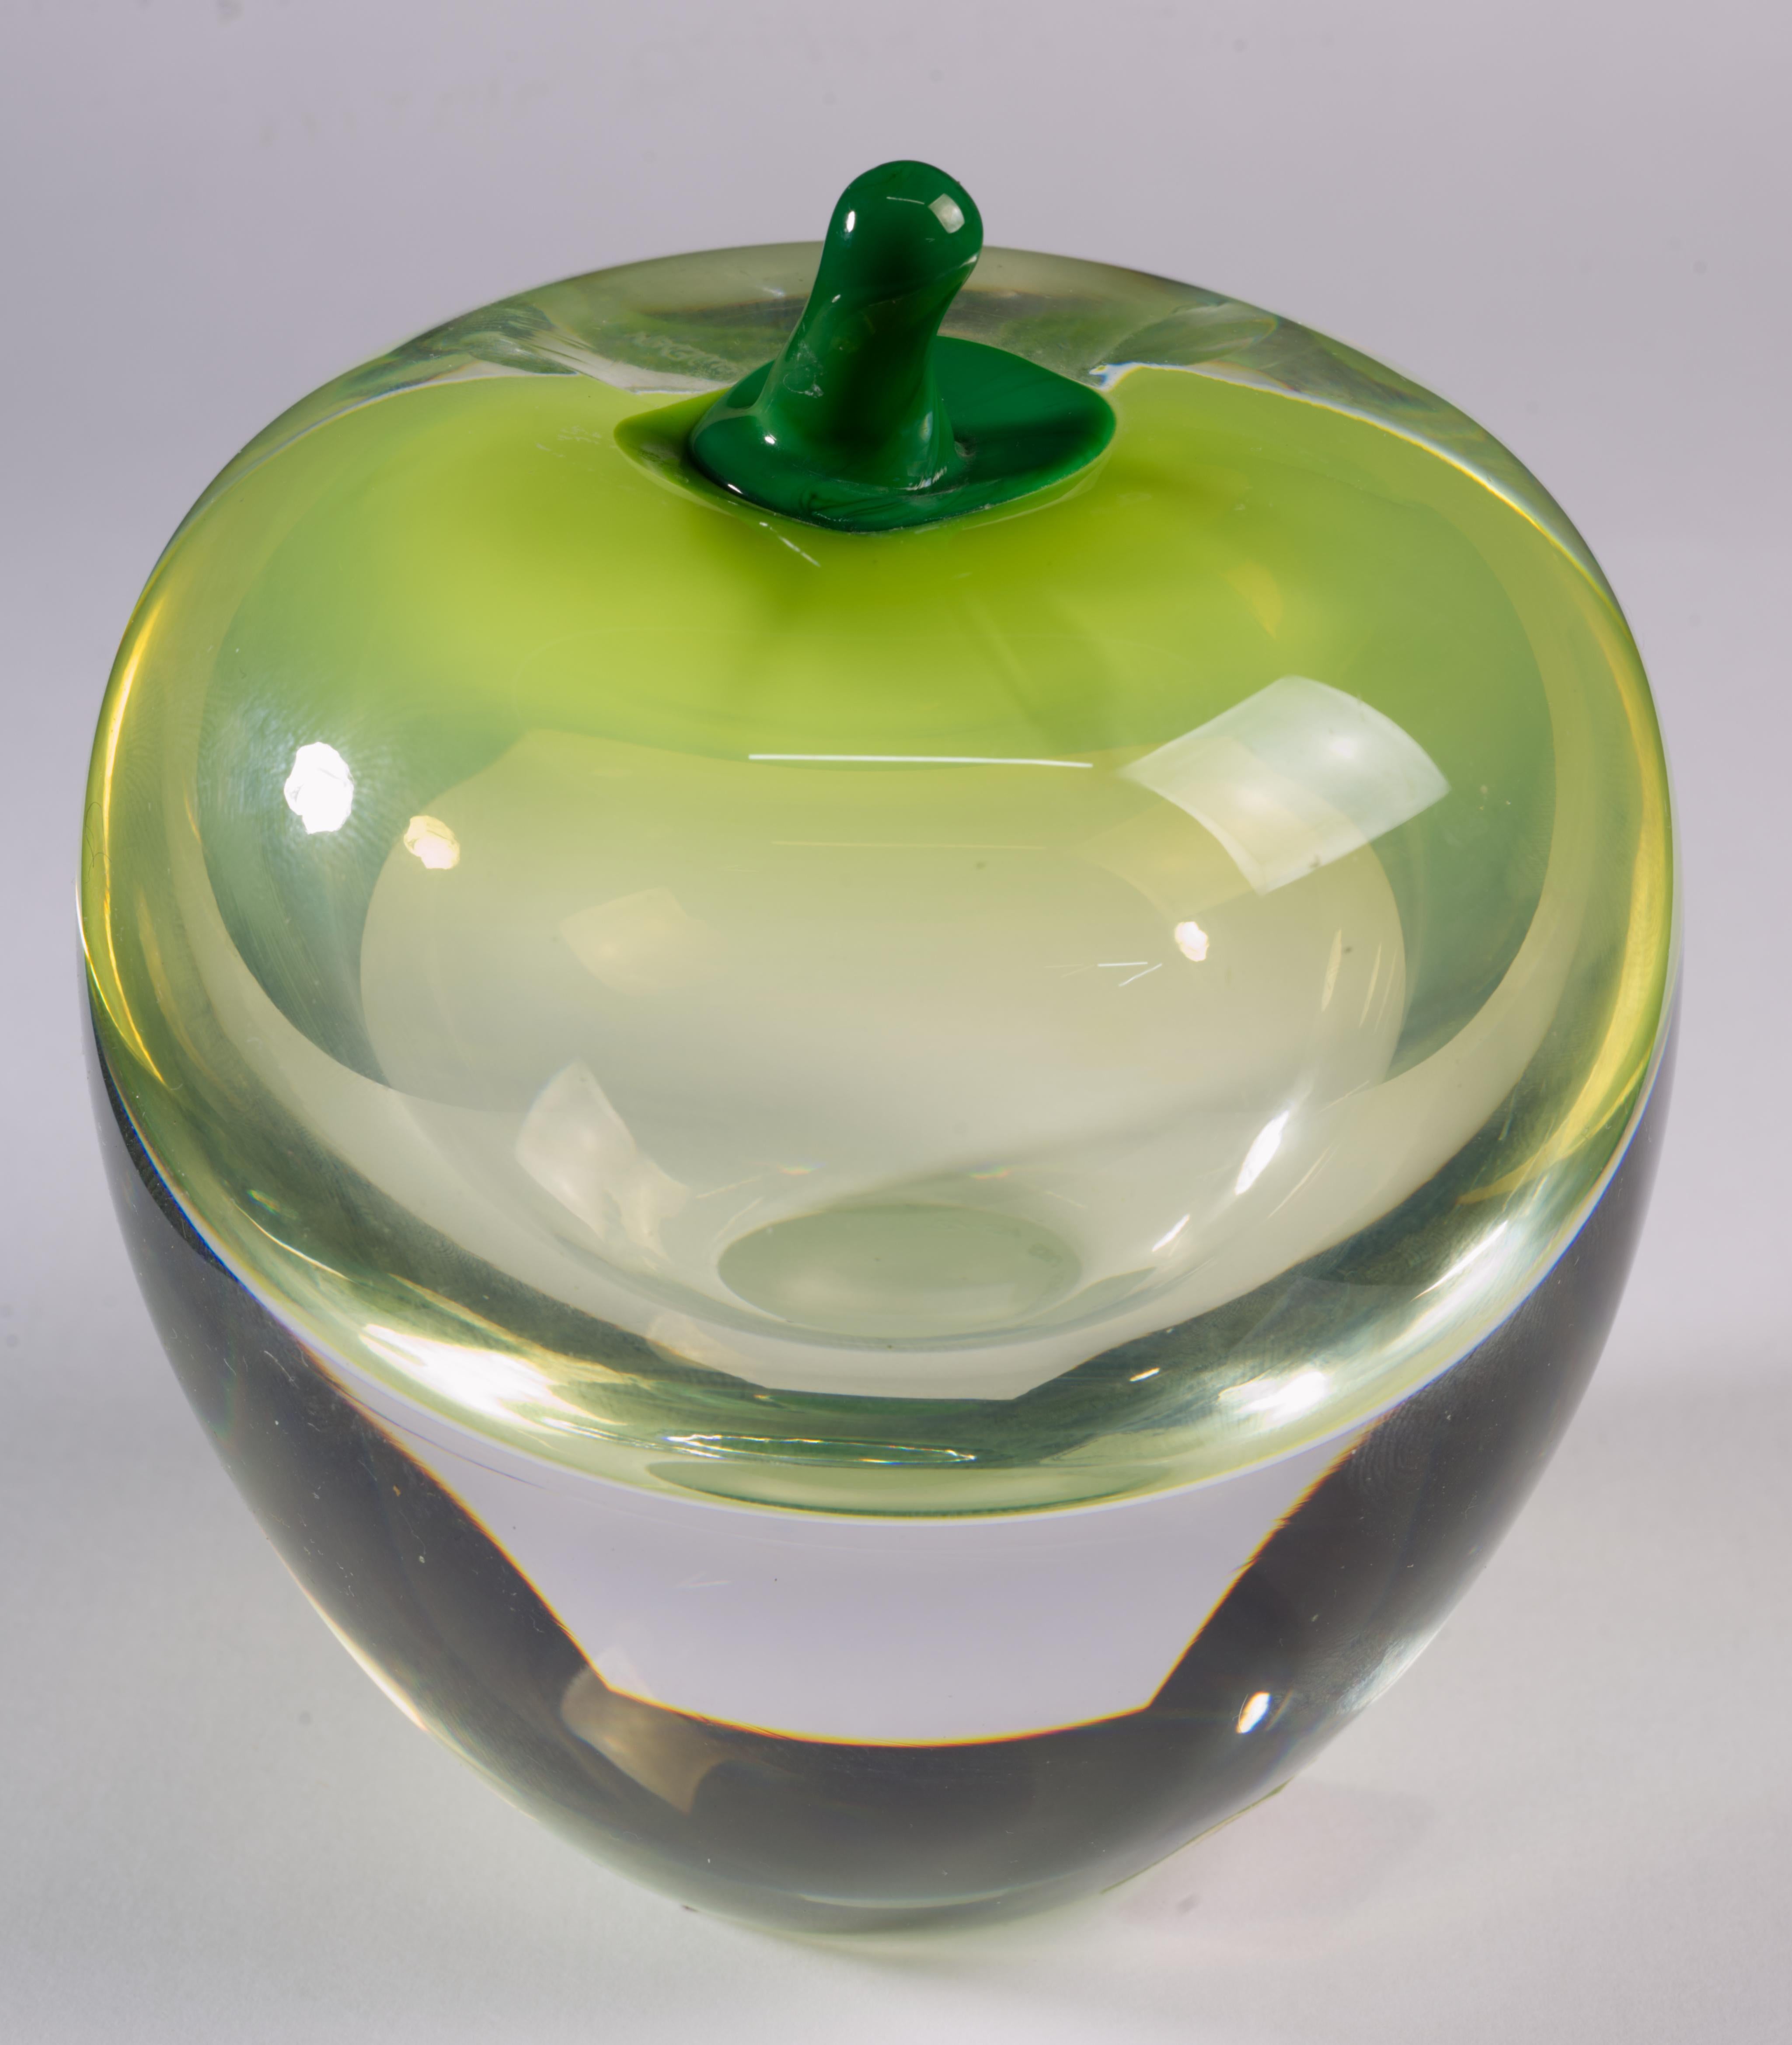  Rare vintage art glass apple sculpture or paperweight by Studio Åhus was handmade in Sweden in 1988 in sommerso technique that originated in Murano, Italy. The core of smoky light green glass with ombre color gradation is submerged inside the clear